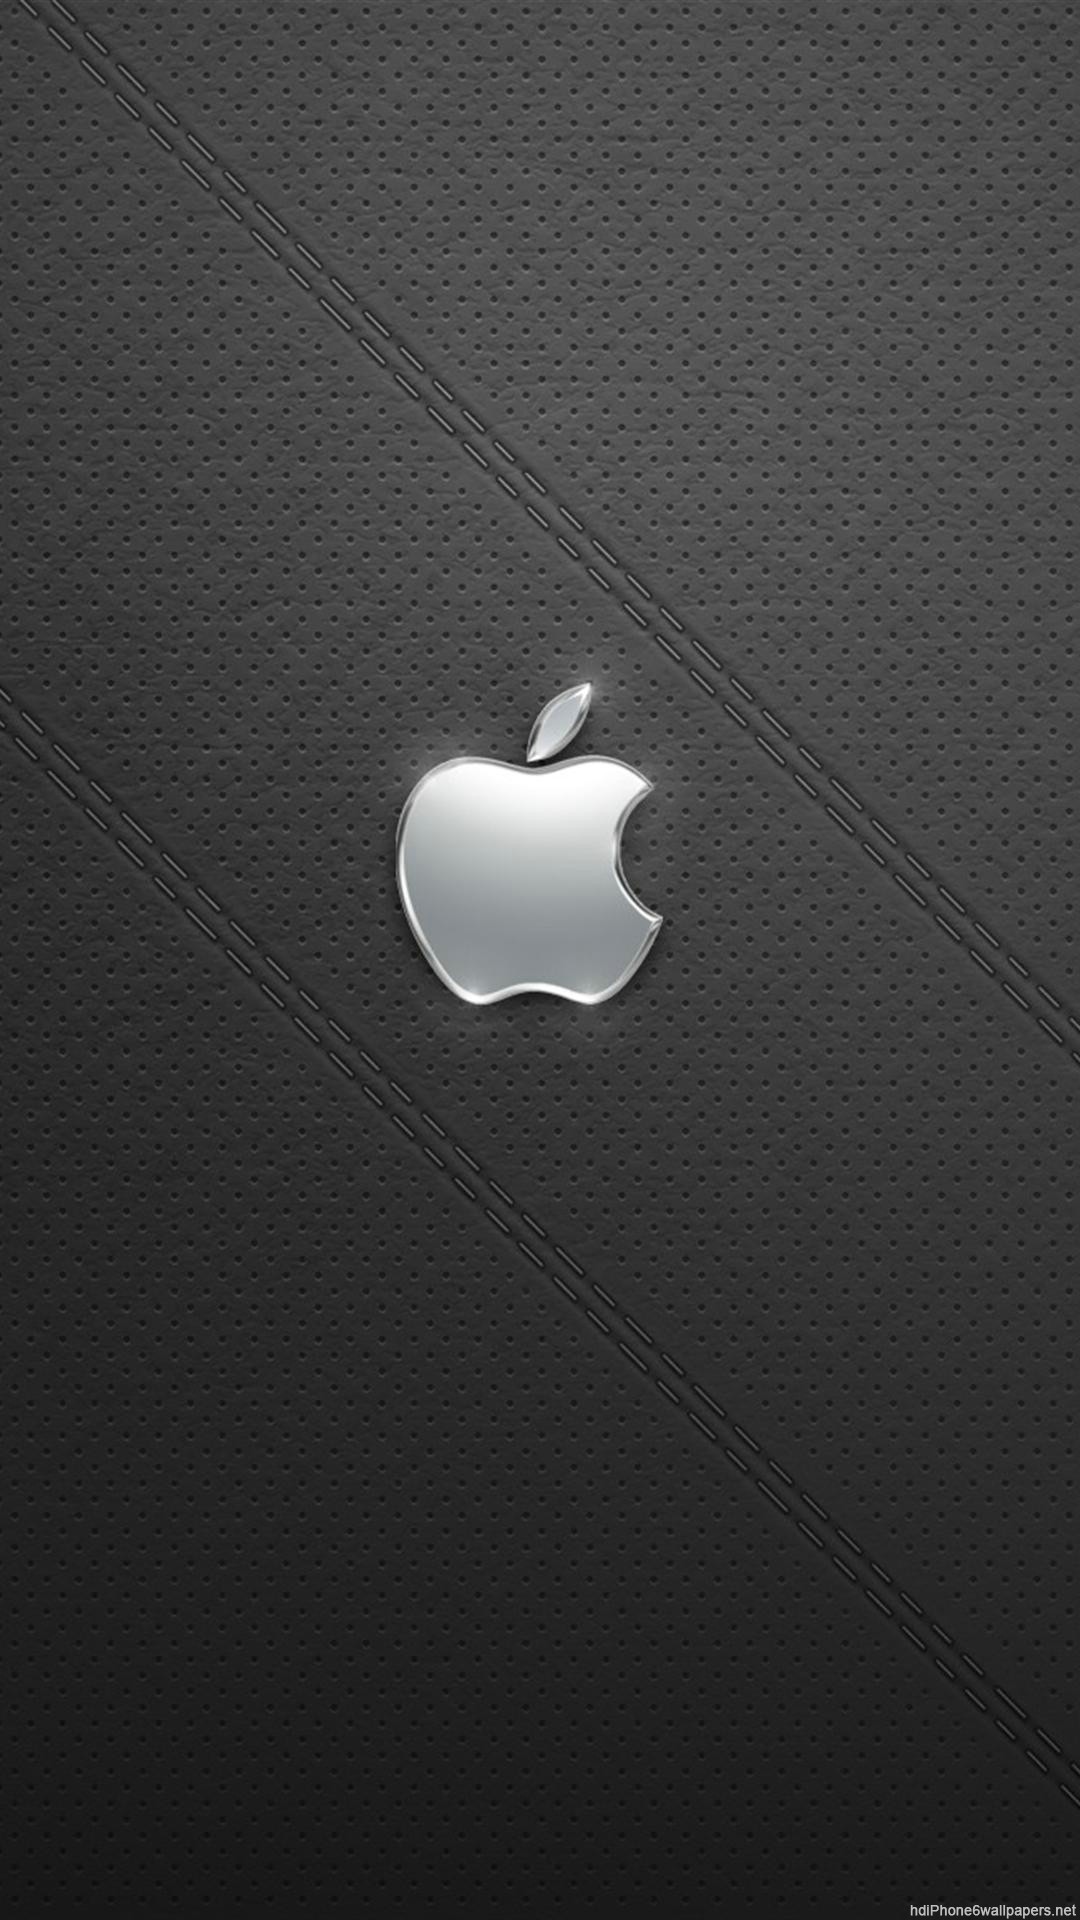 1080x1920 More apple iPhone 6 wallpapers